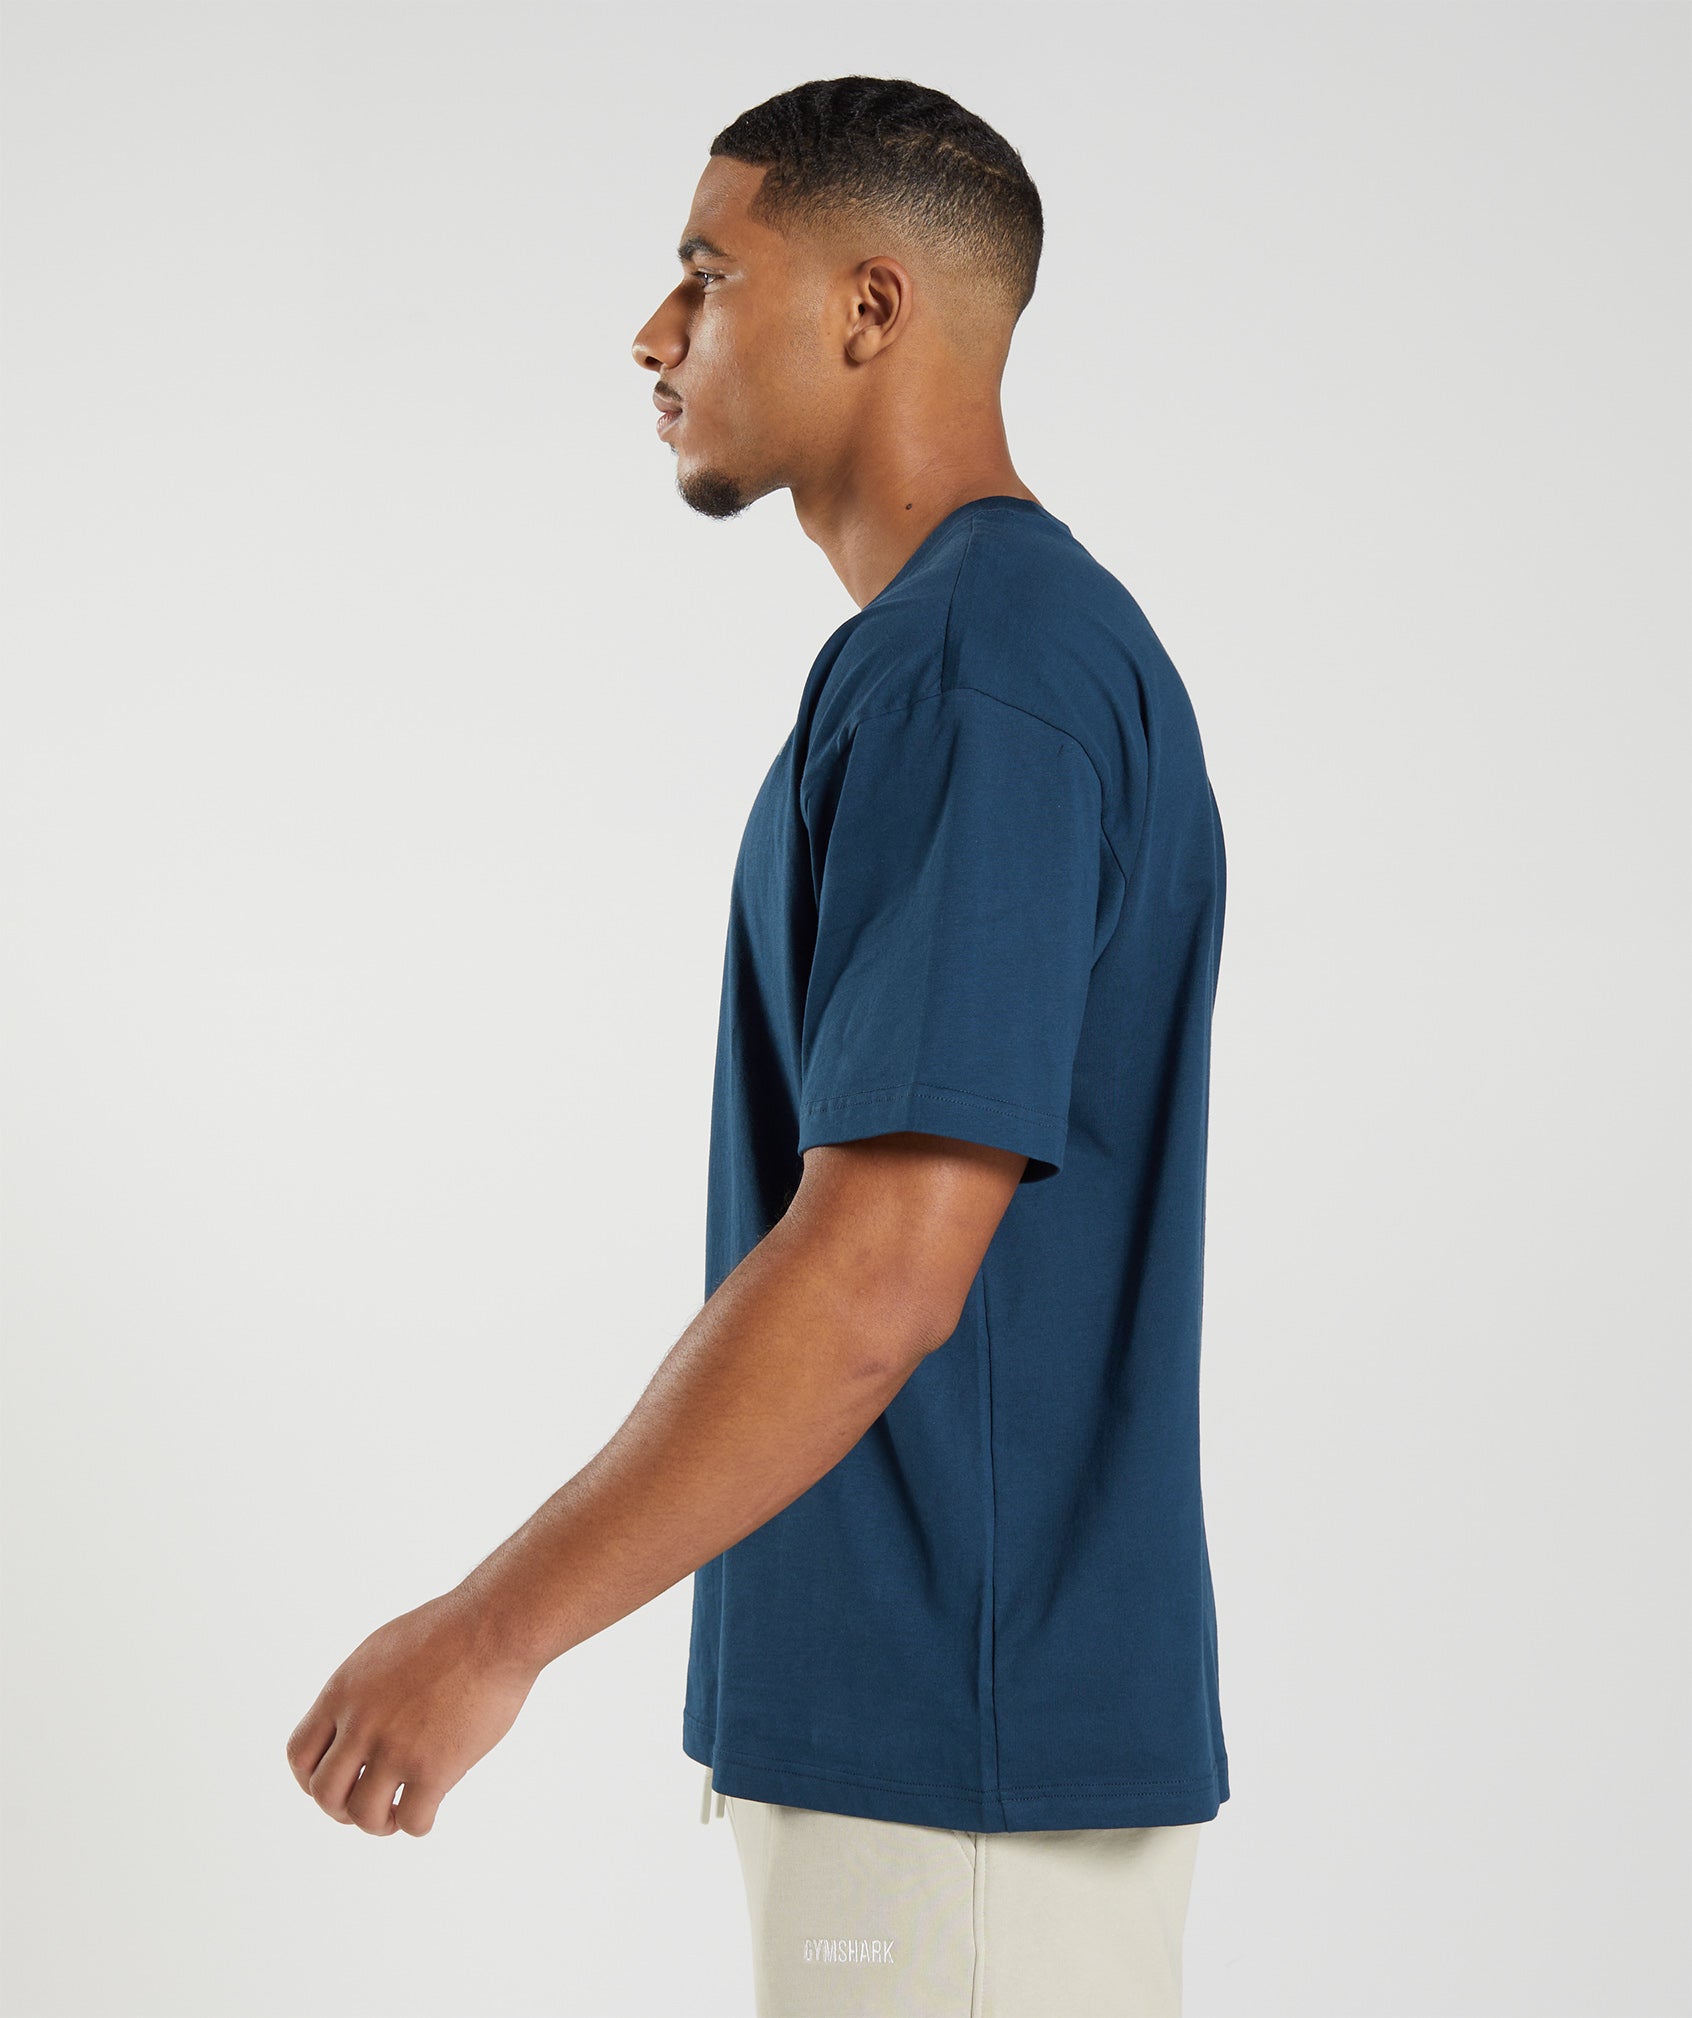 Rest Day Sweats T-Shirt in Navy - view 4